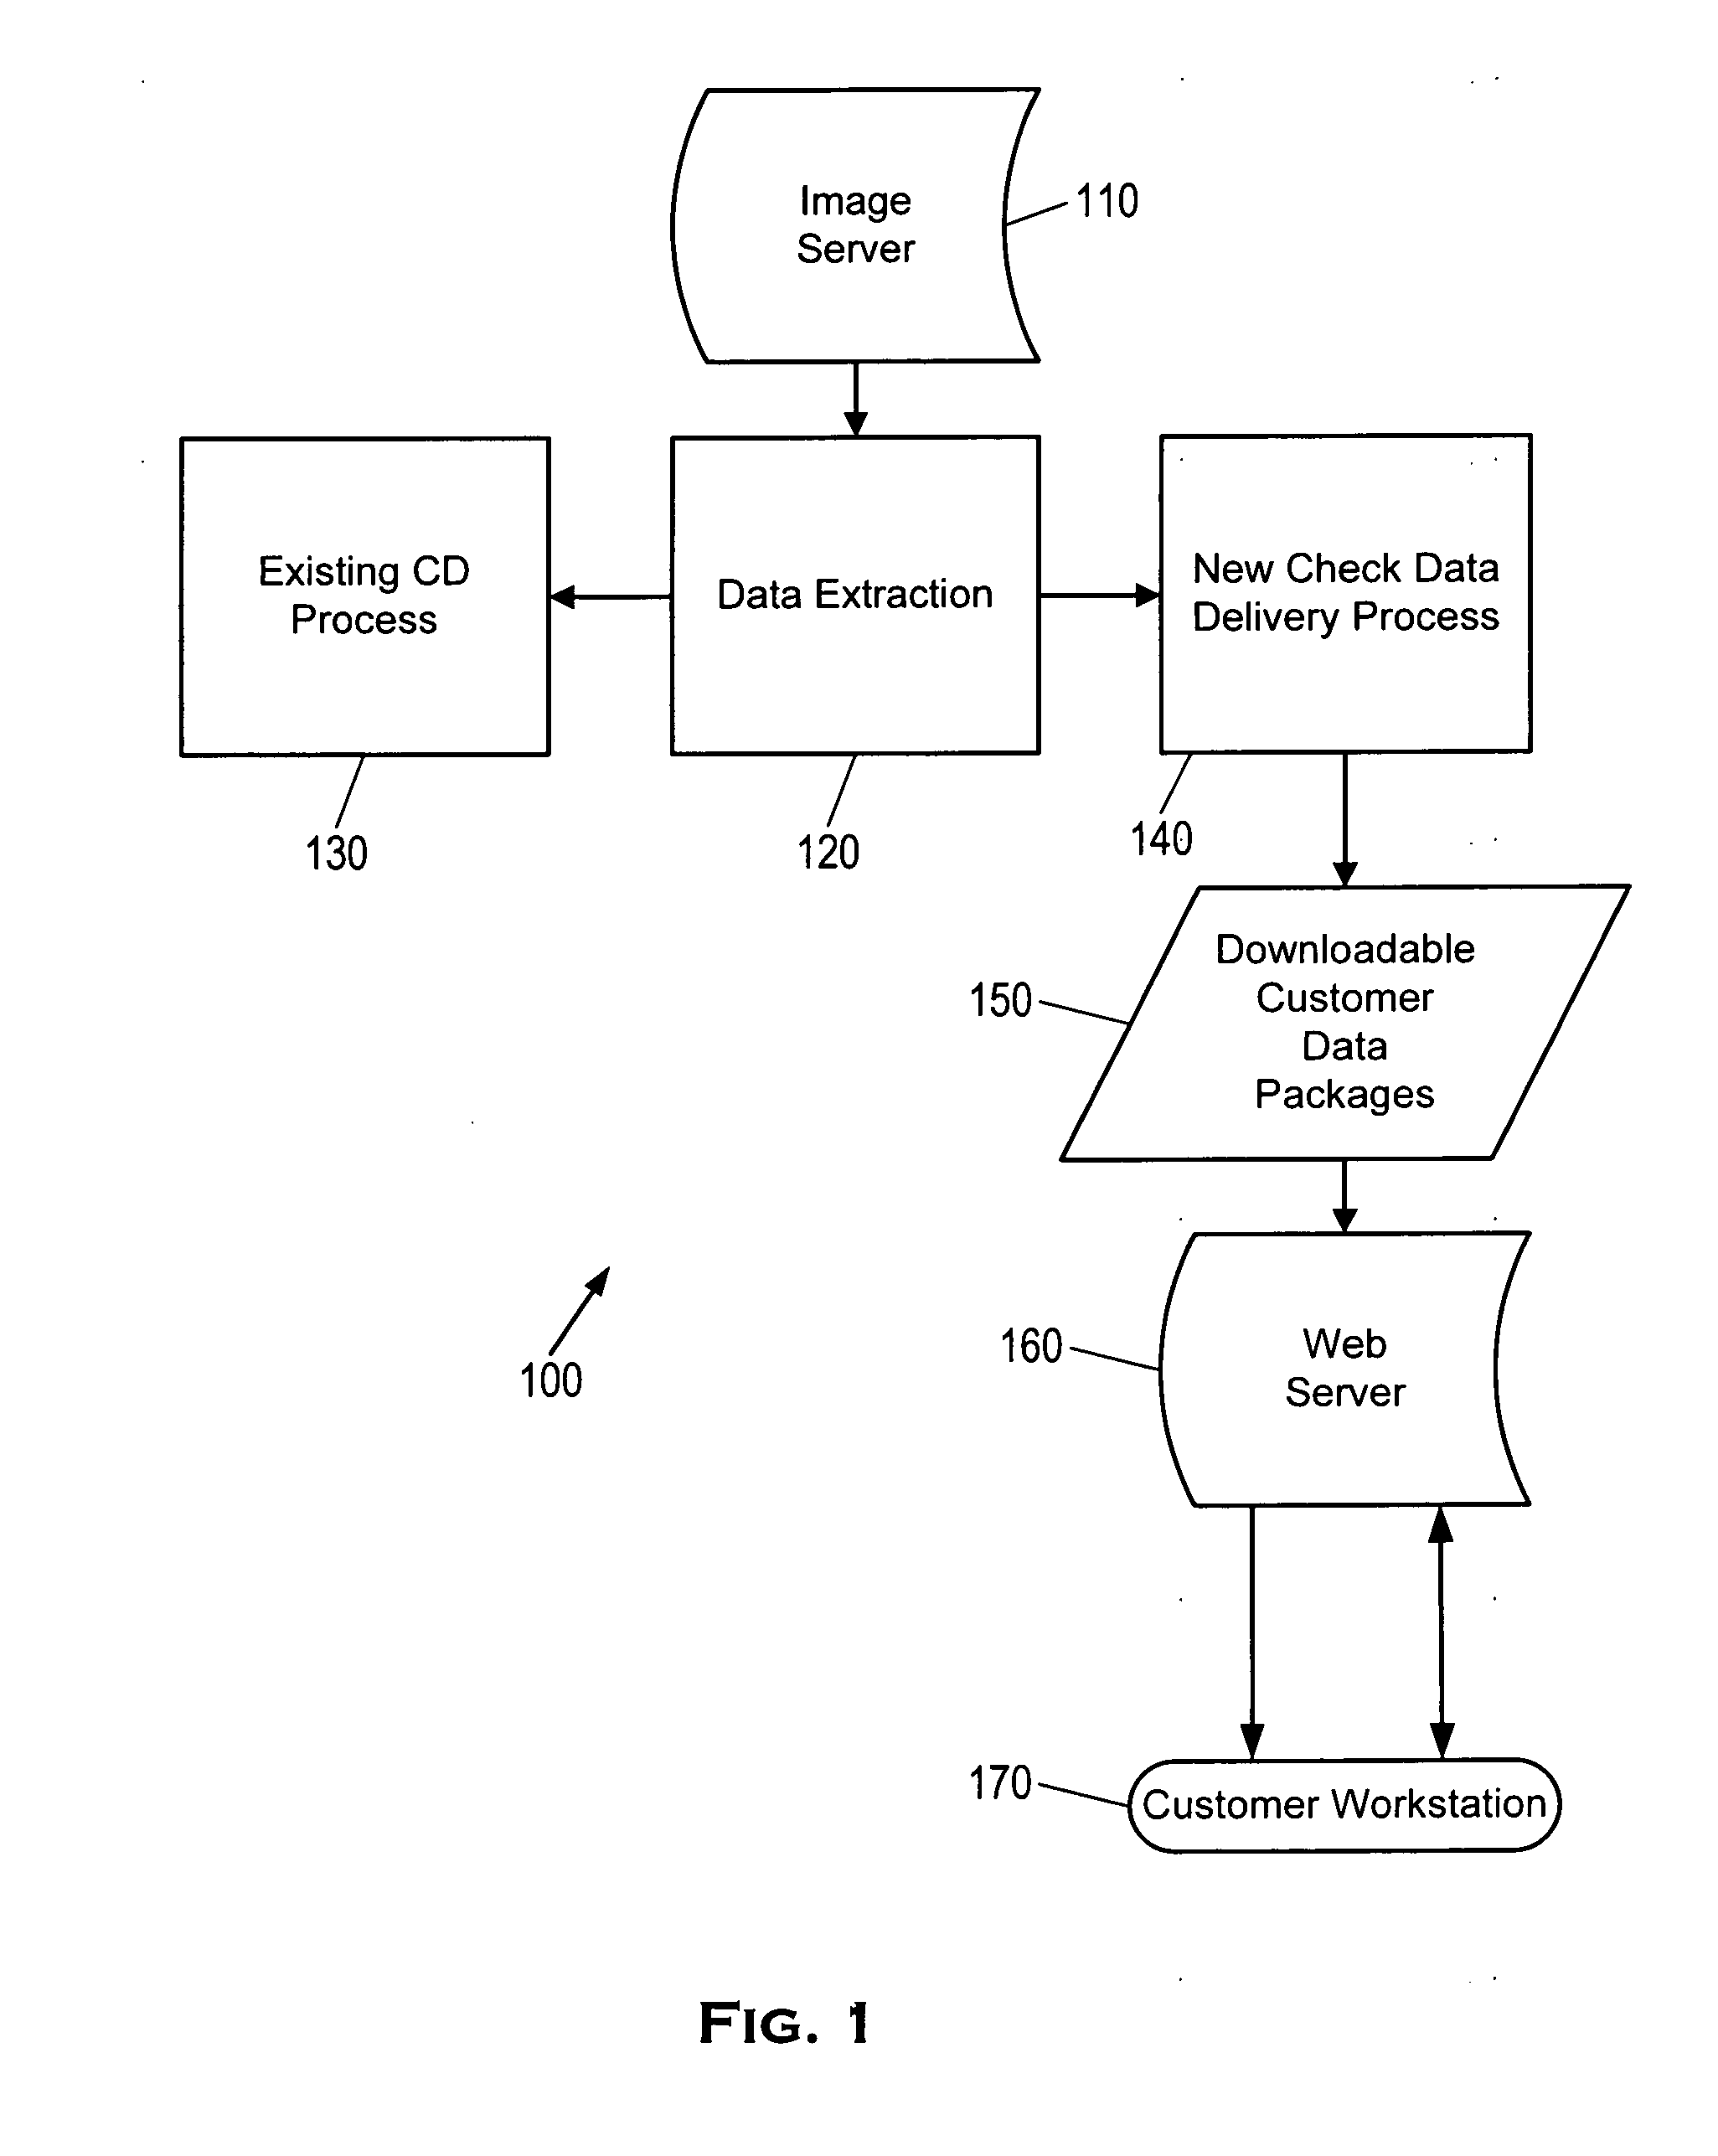 Financial Statement and Transaction Image Delivery and Access System